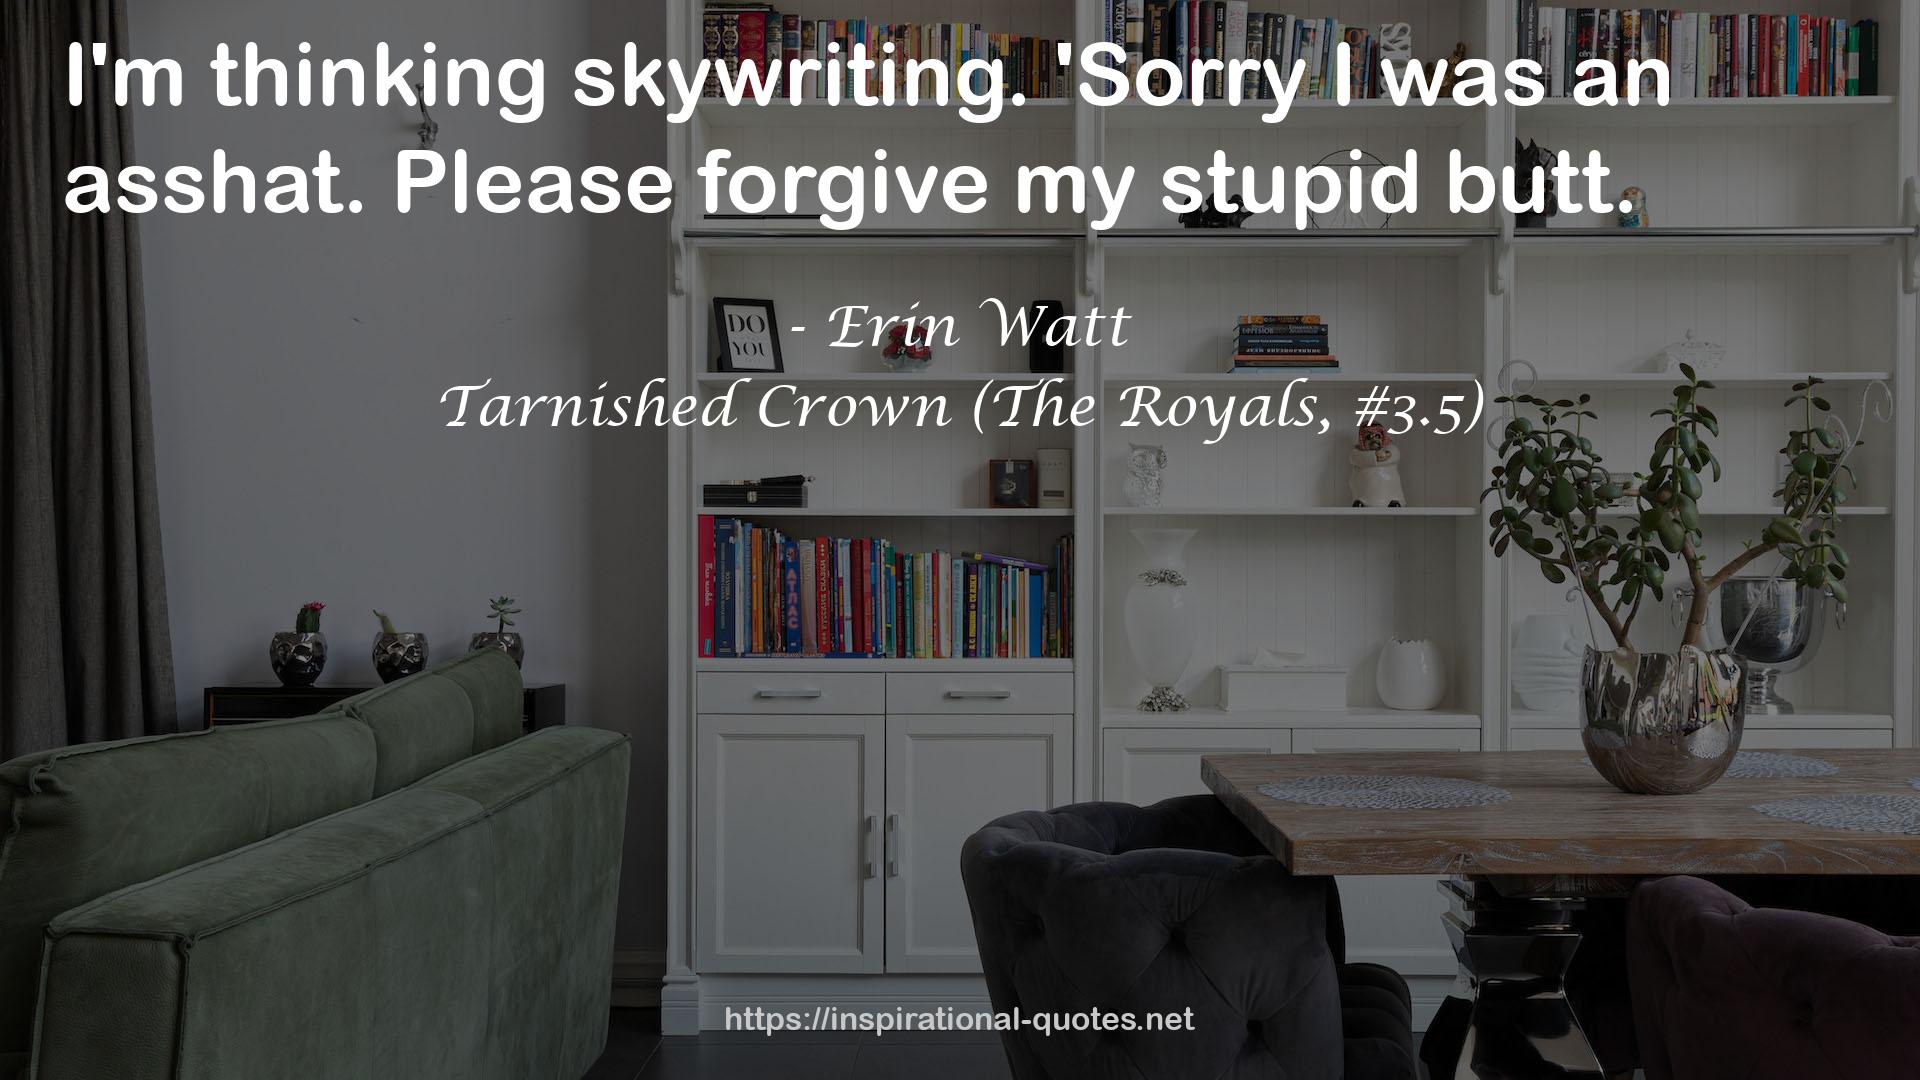 Tarnished Crown (The Royals, #3.5) QUOTES